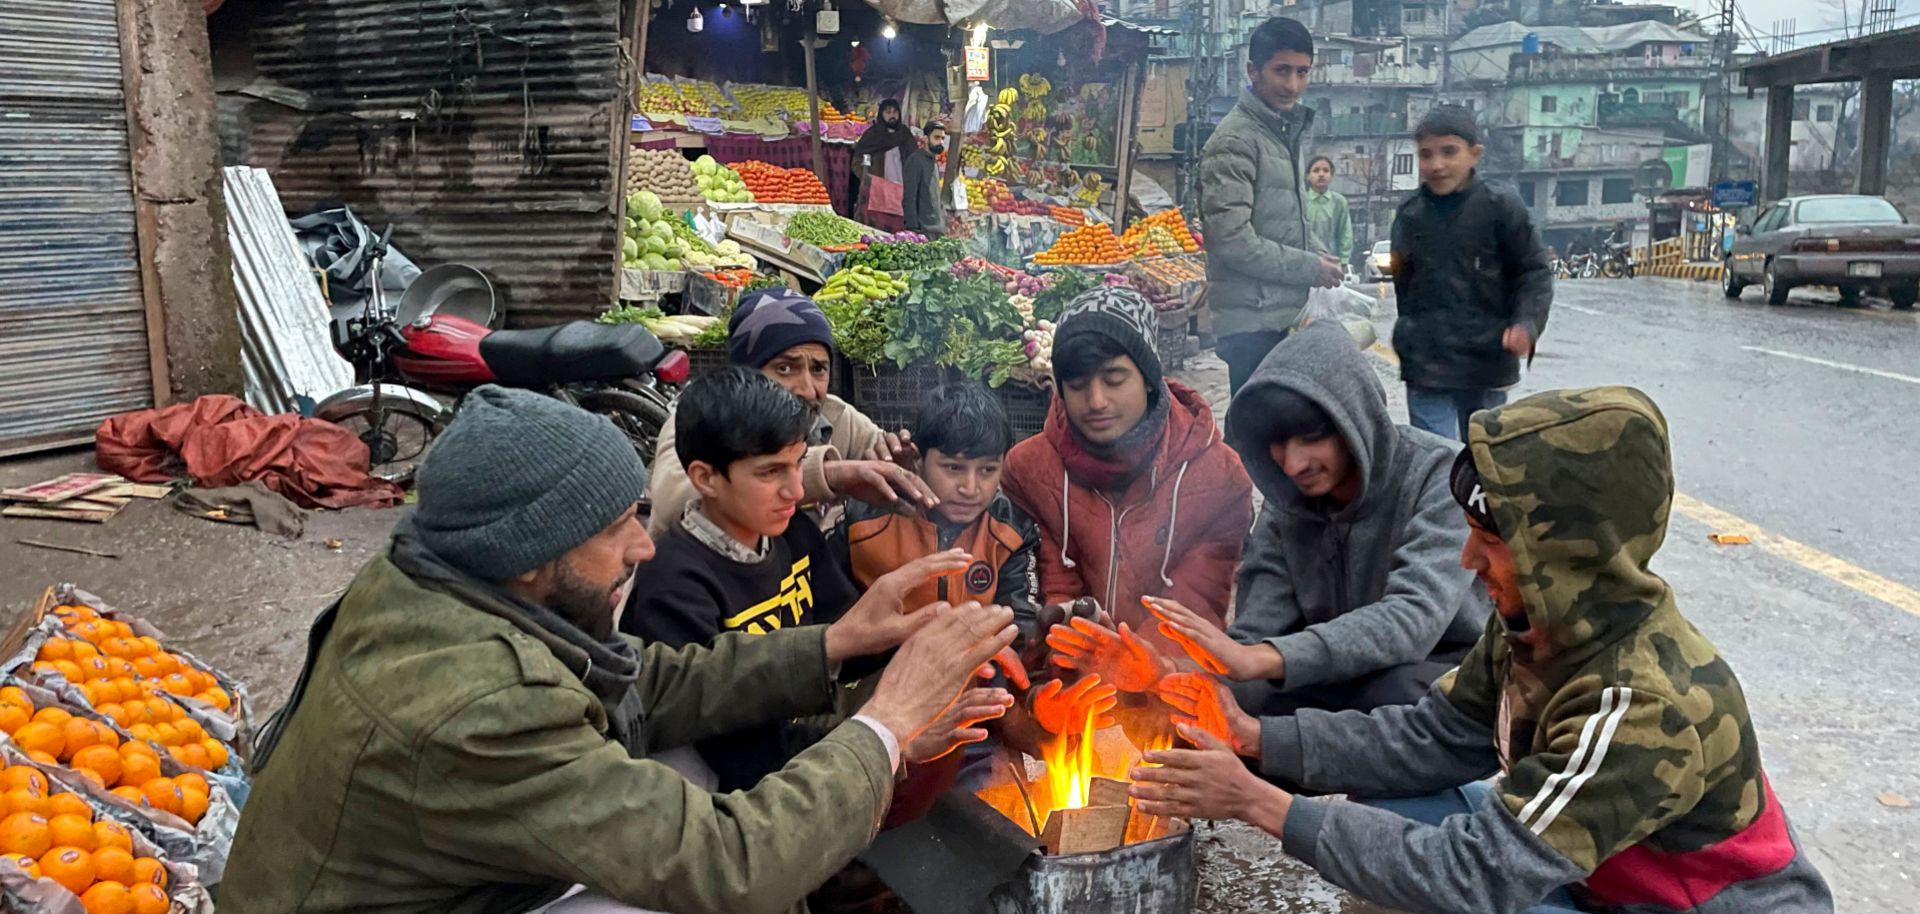 Vendors at a market warm themselves around a bonfire in Muzaffarabad, Pakistan, during a nationwide power outage on Jan. 23, 2023.